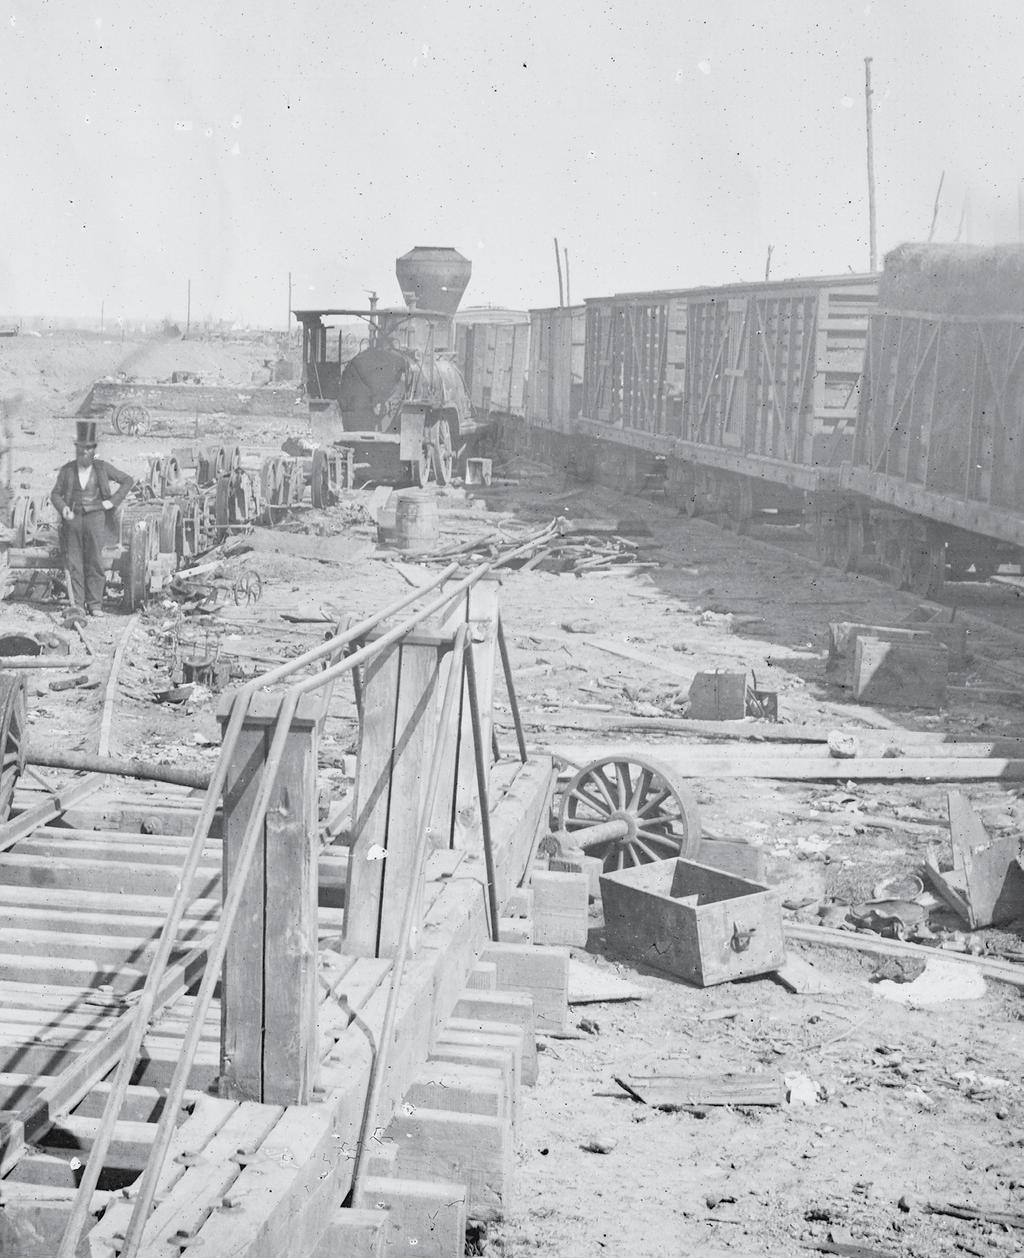 Below: Much of the infrastructure in the South was destroyed during the Civil War.